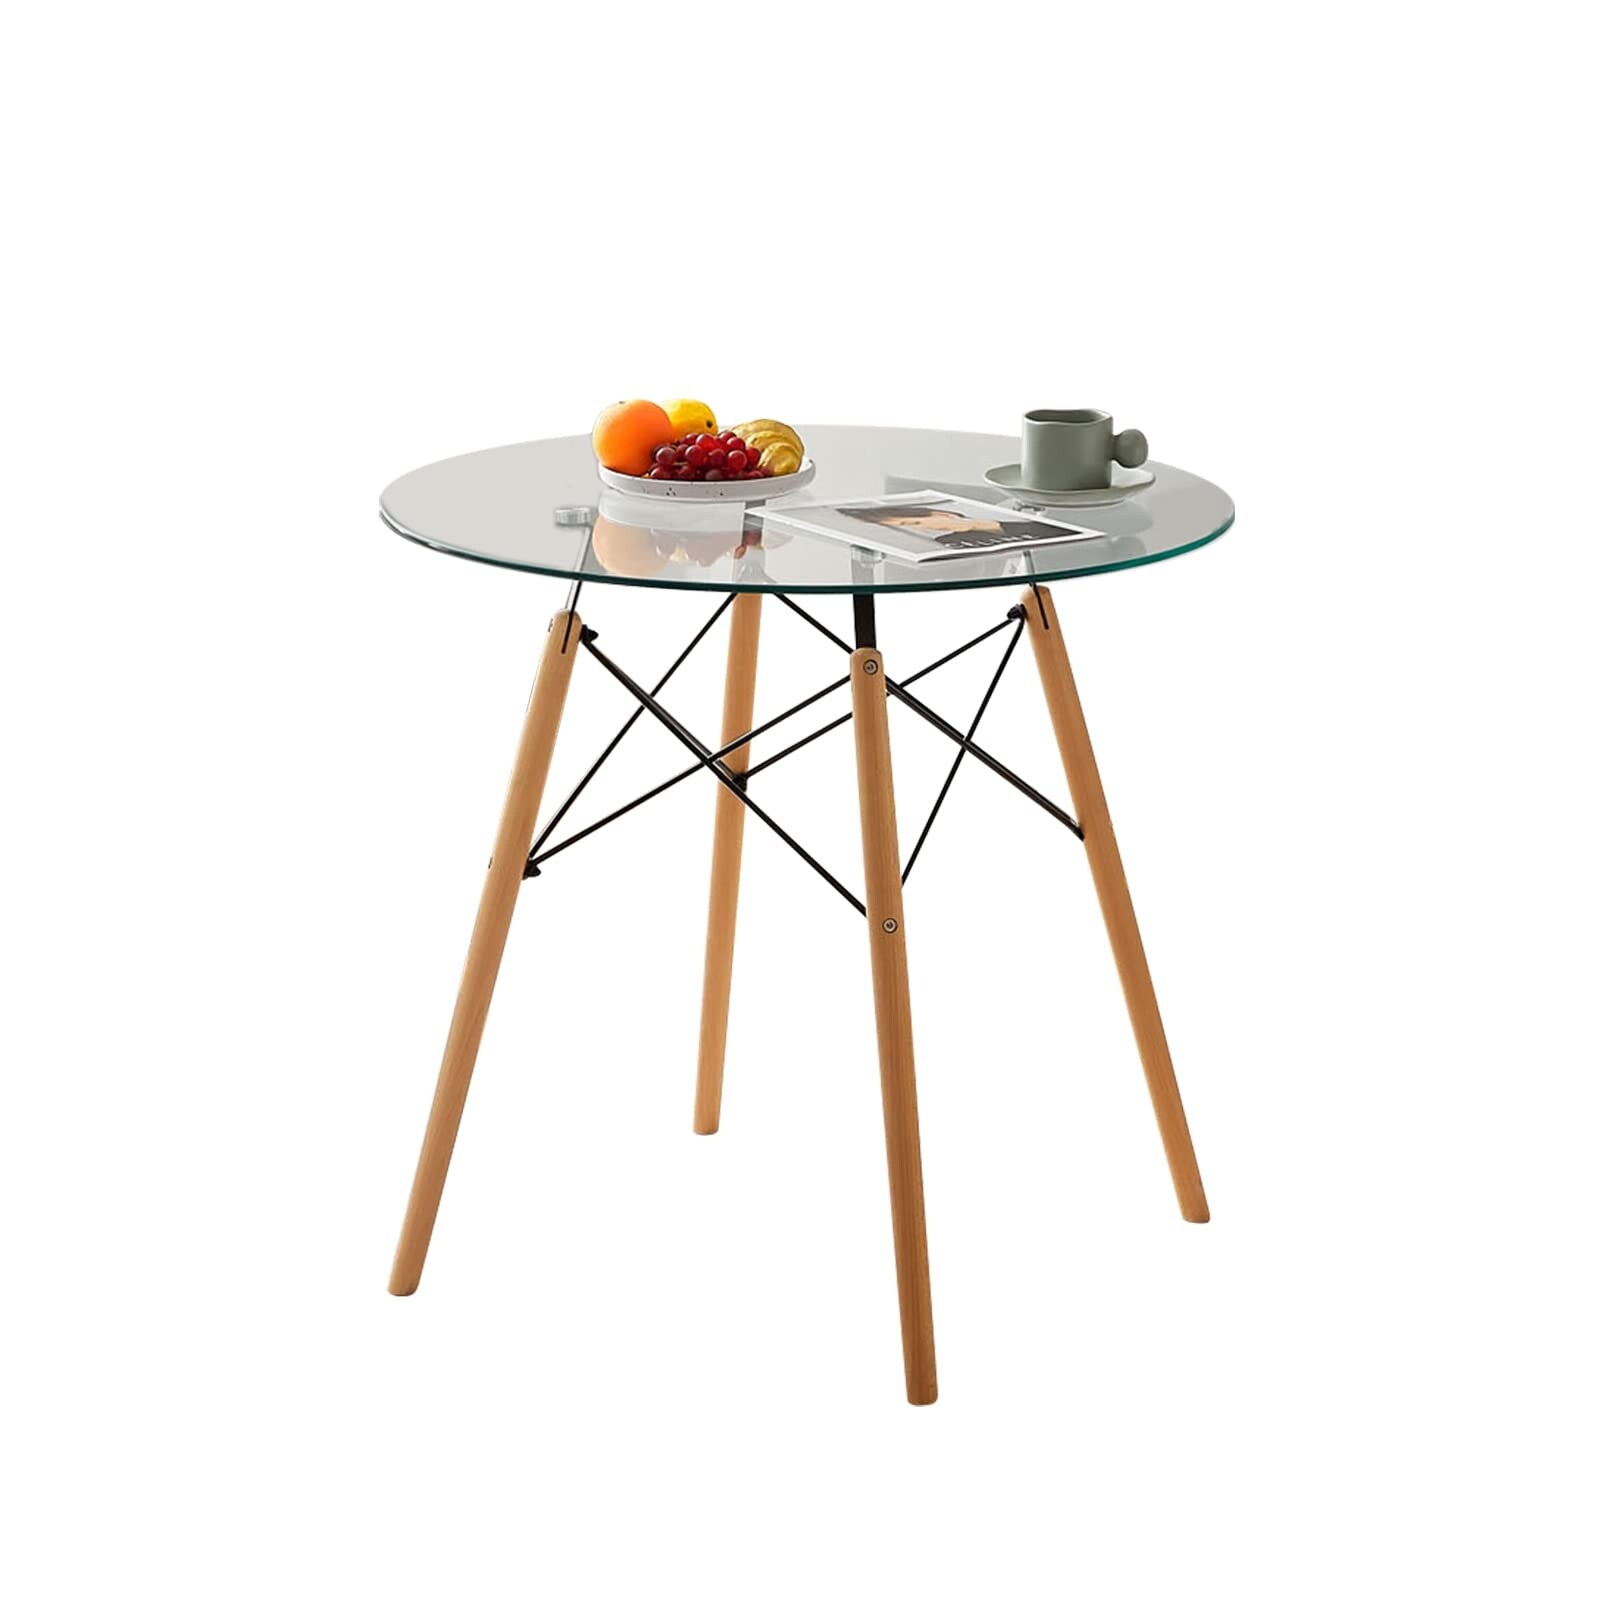 https://ak1.ostkcdn.com/images/products/is/images/direct/7106c6b10b647cbdad1d3408479b2983f75643db/Liink1Ga-Glass-Dining-Table-31.5%27%27-Small%2CRound%2CModern-Dining-Room-Table-Kitchen-Table-Coffee-Table---for-2-to-4-People.jpg